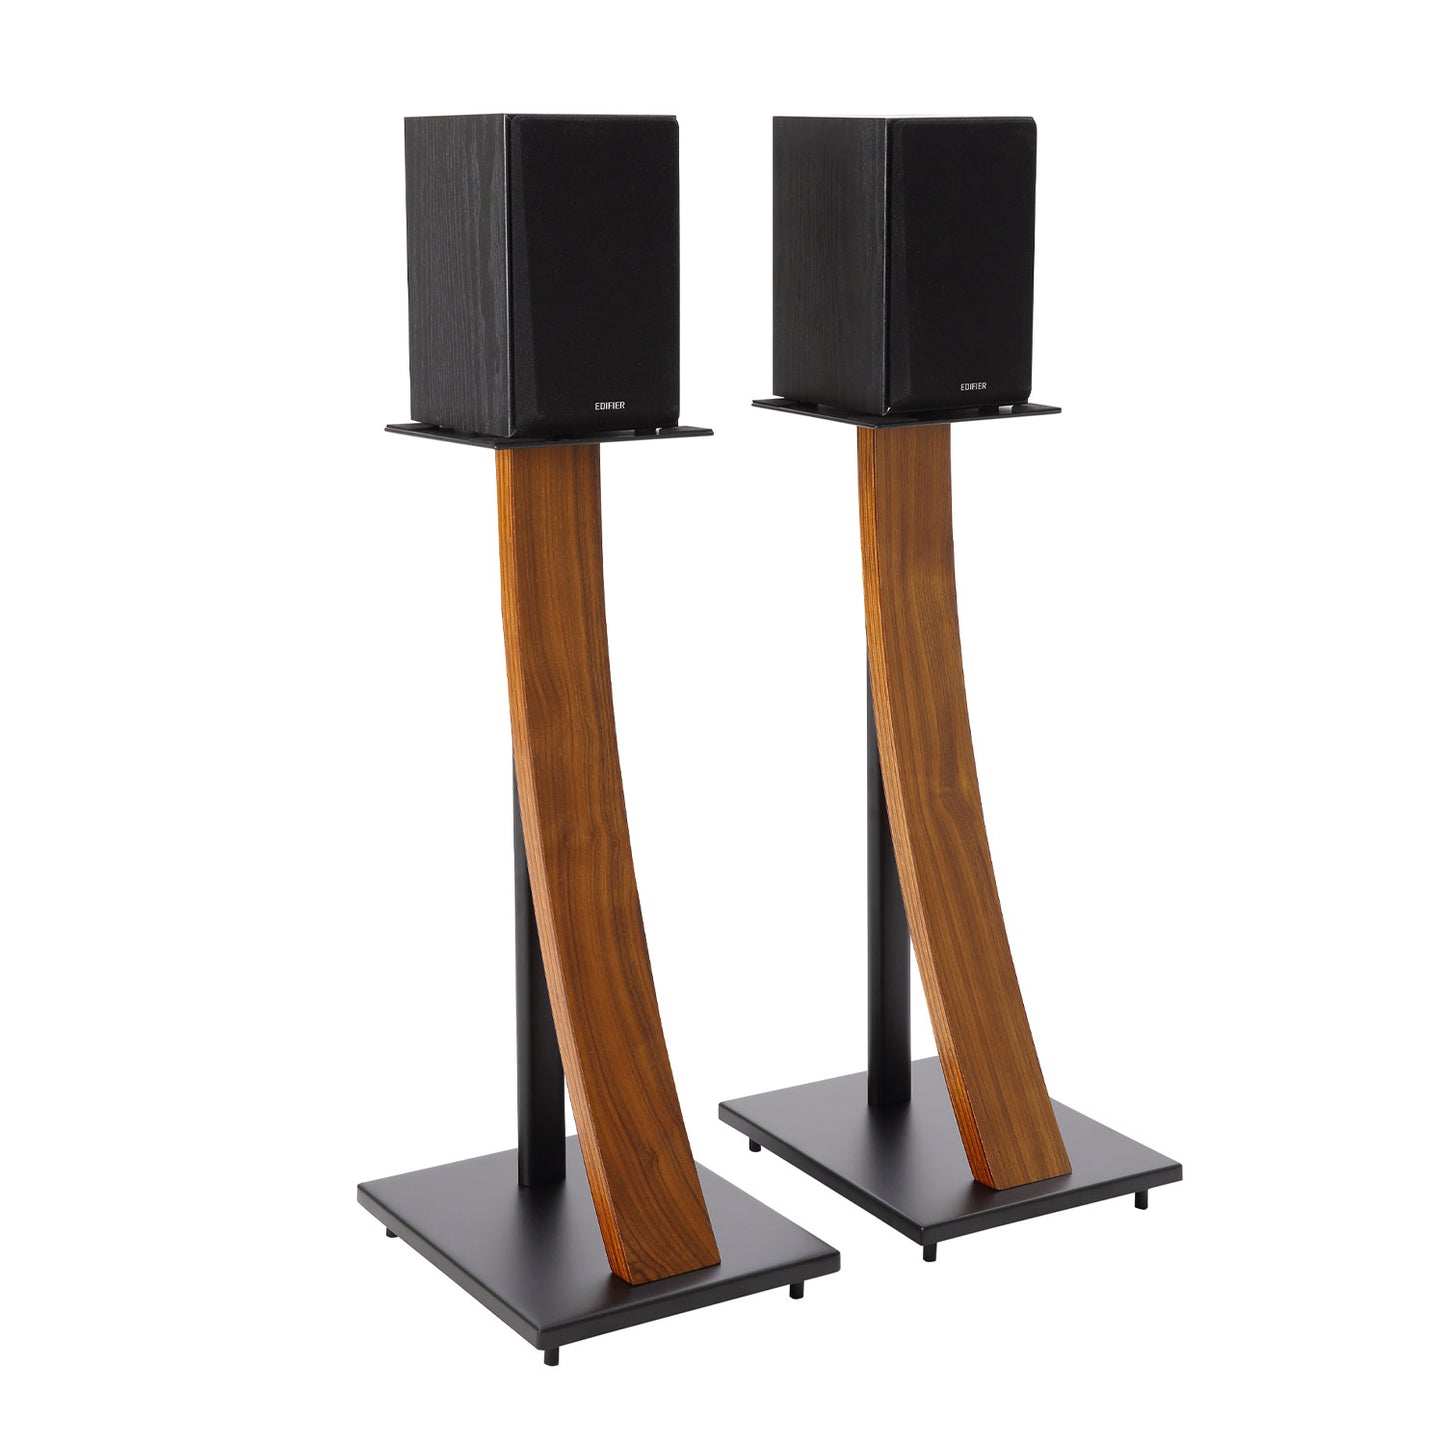 EXIMUS One Pair Fixed Height Universal Speaker Floor Stands with Real Wood - Espresso (290 Series)